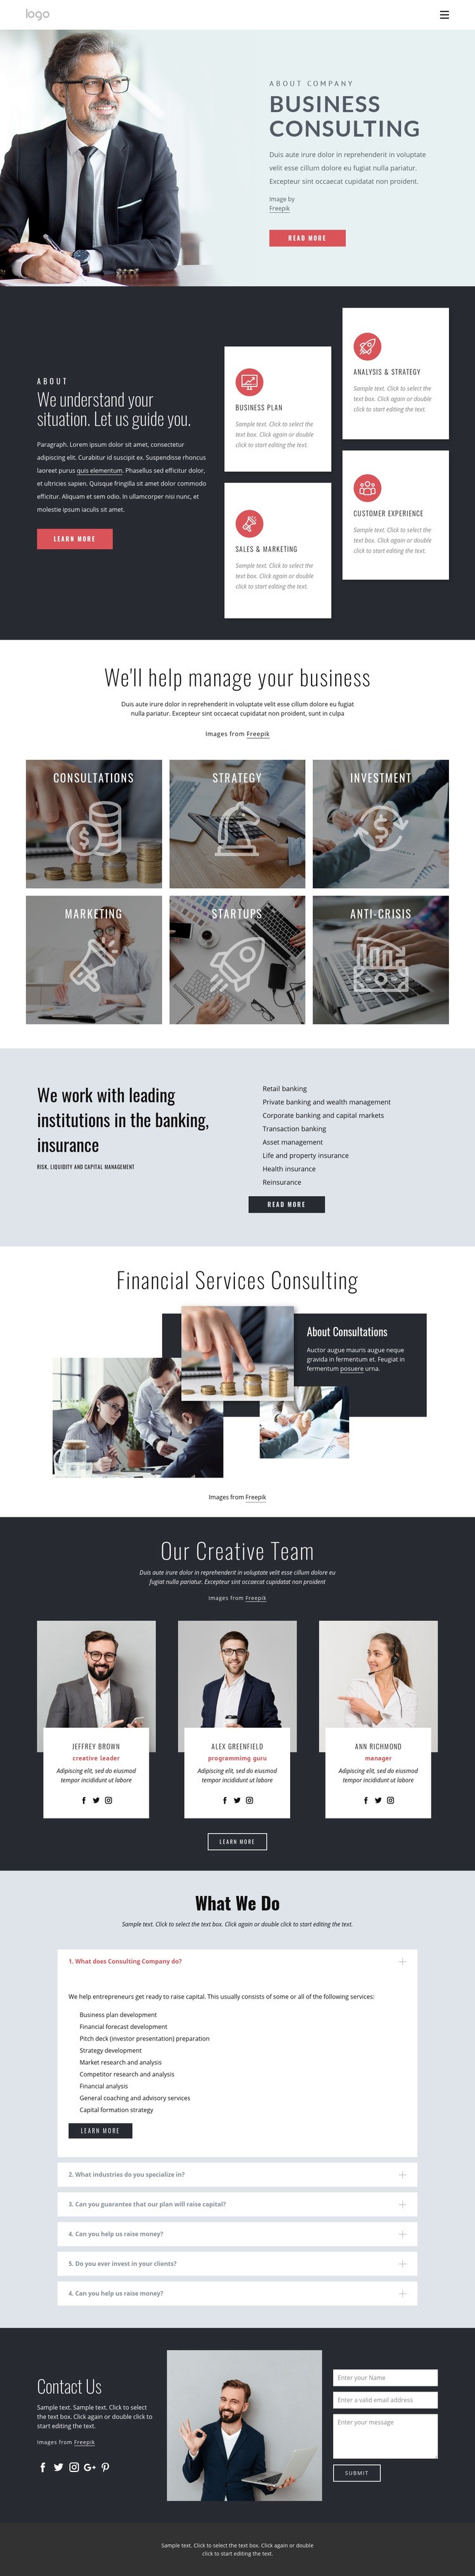 Successful financial strategy Web Page Design